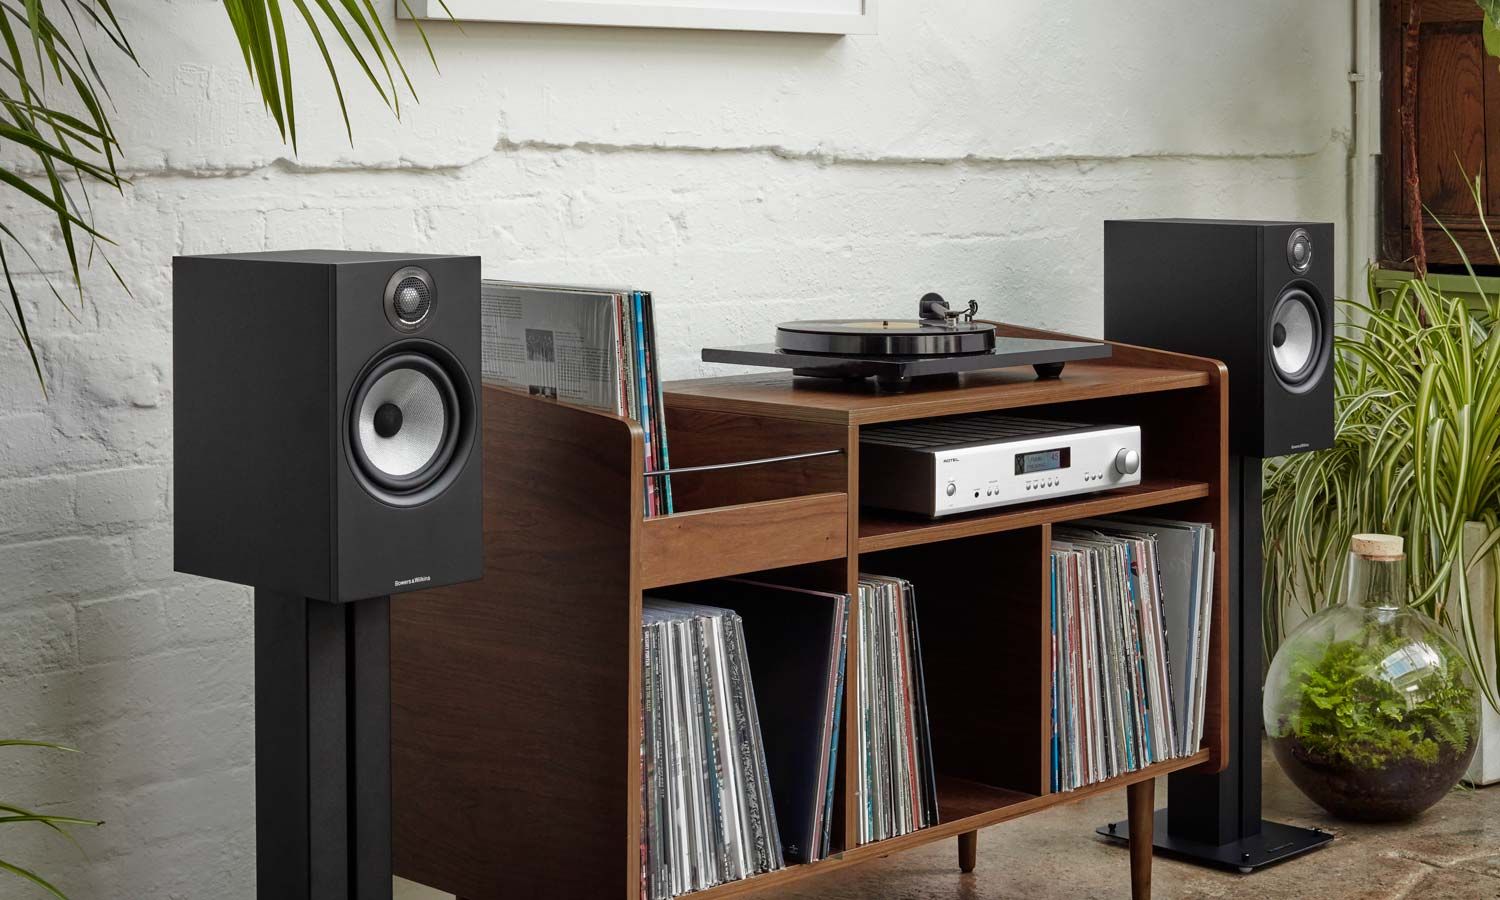 Bowers and Wilkins, large wooden speakers in room with white walls